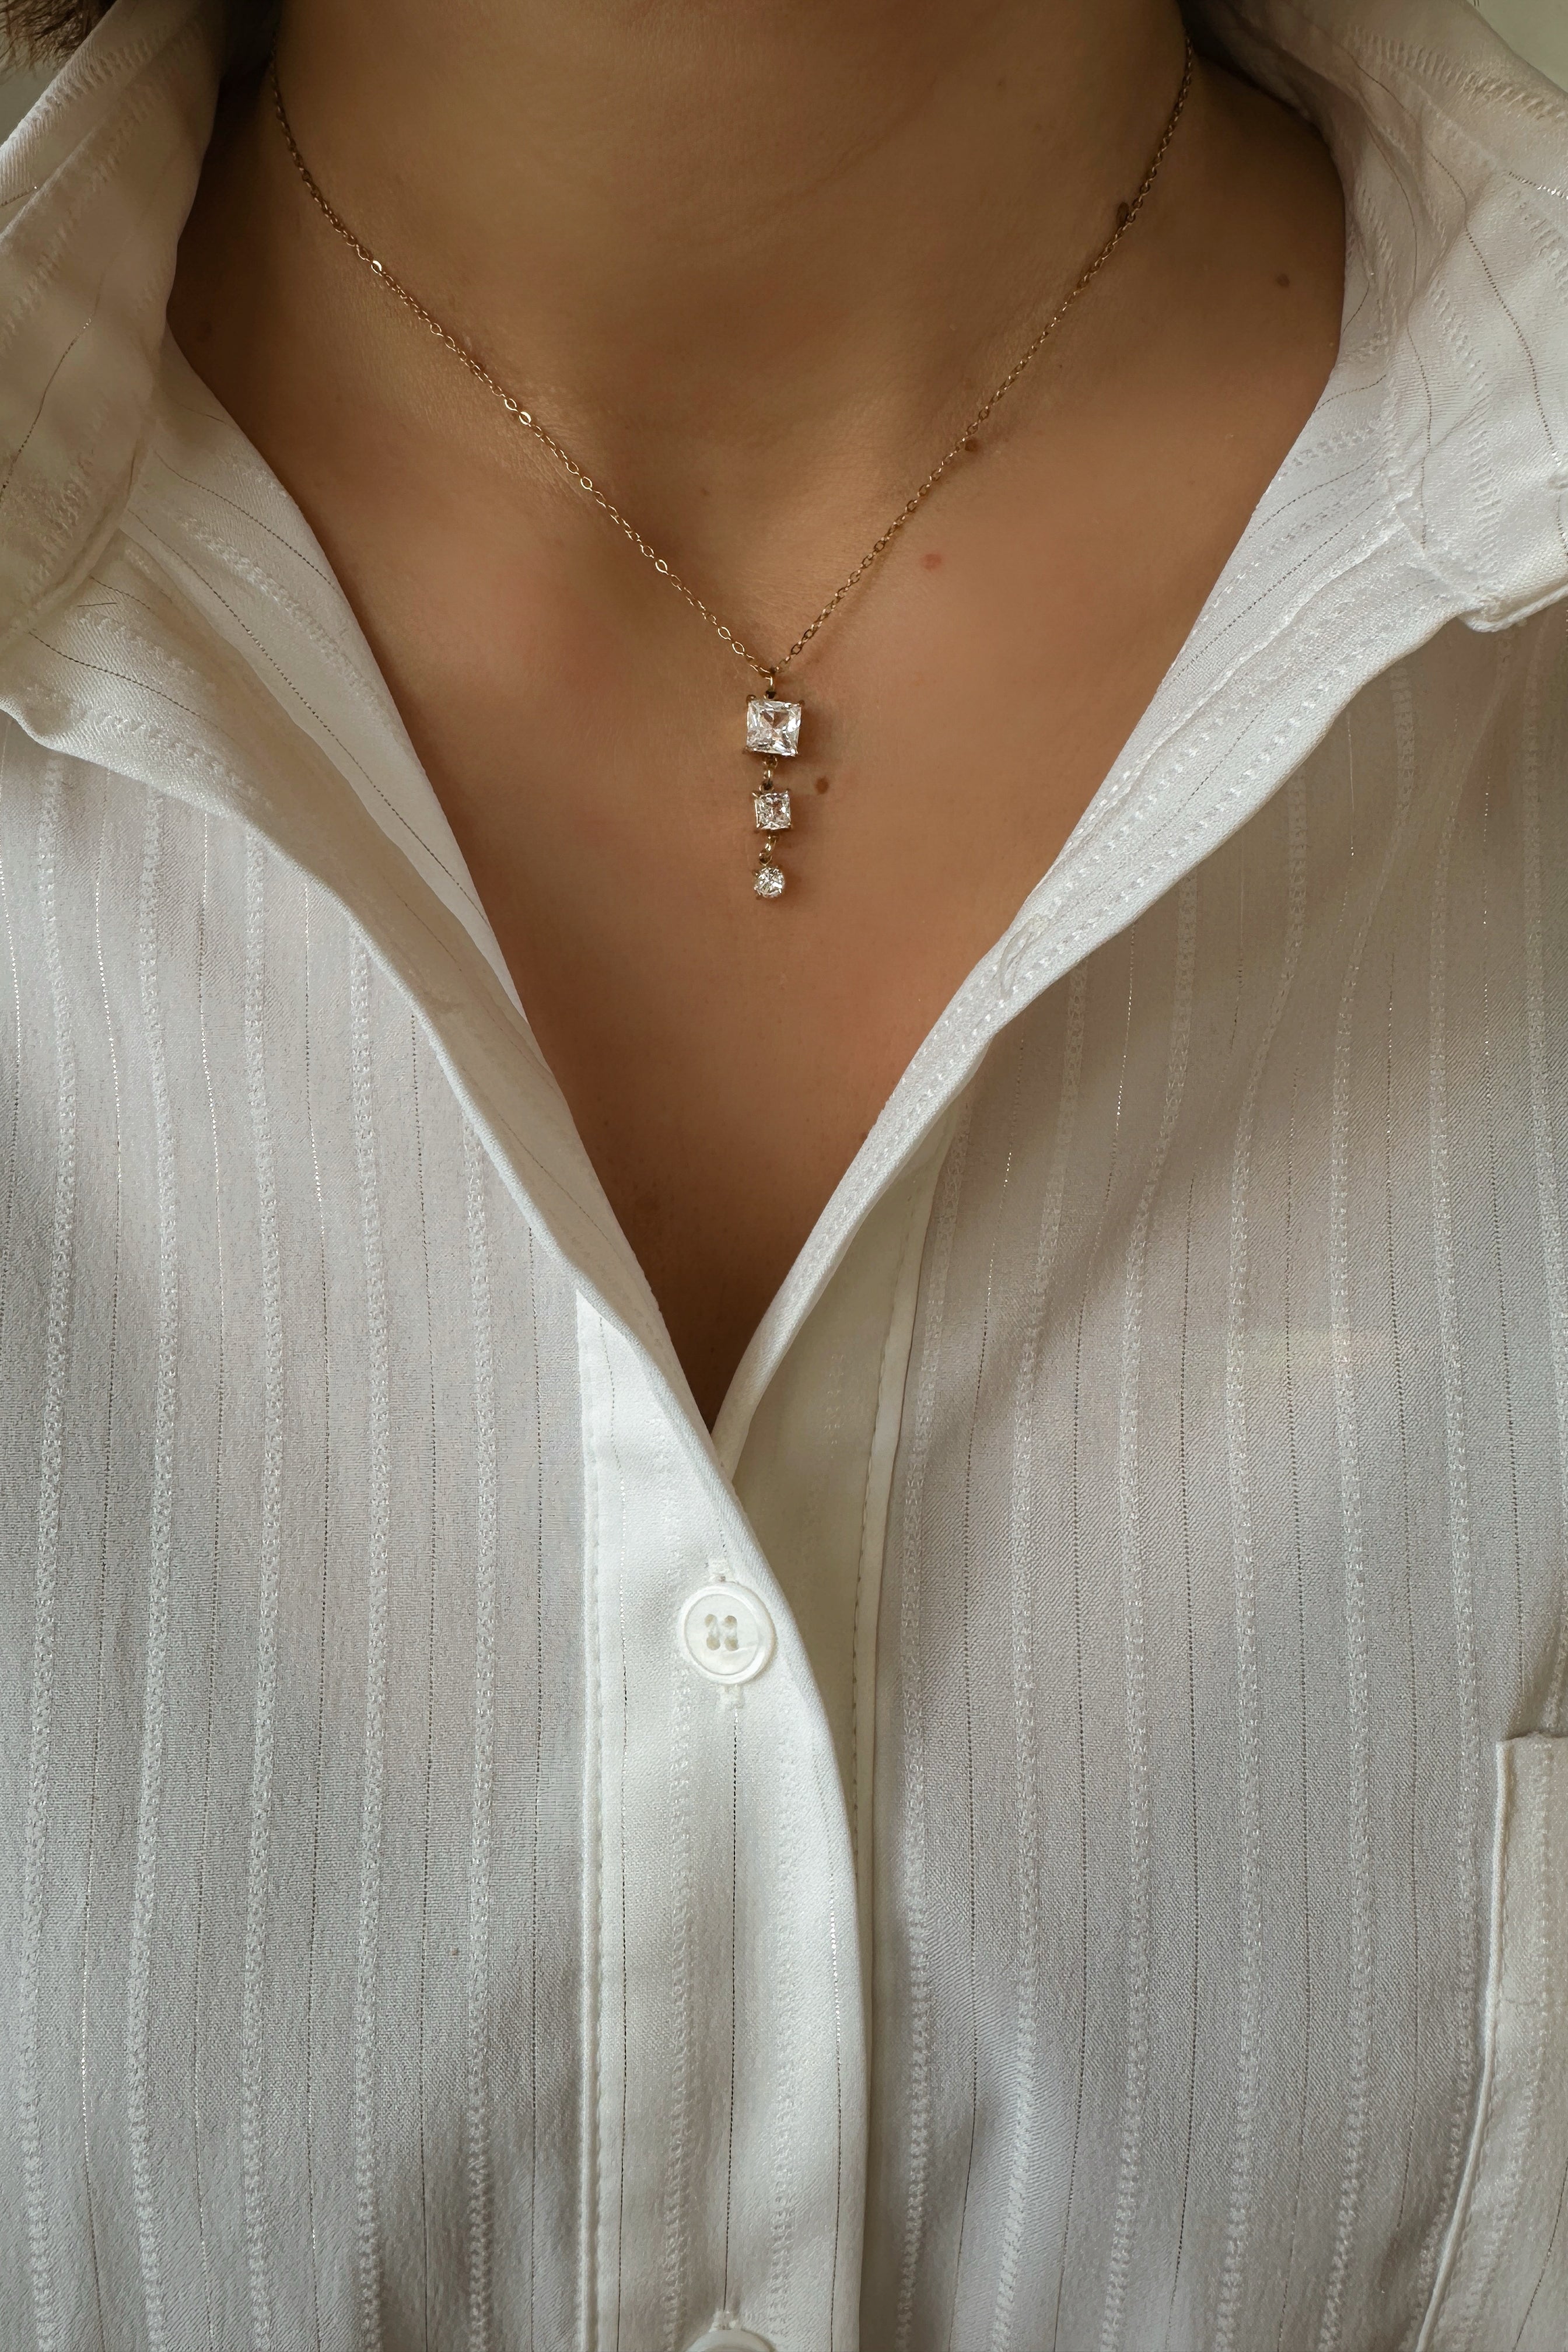 The Heart - Cubic Zirconia Drop Necklace - Boutique Minimaliste has waterproof, durable, elegant and vintage inspired jewelry